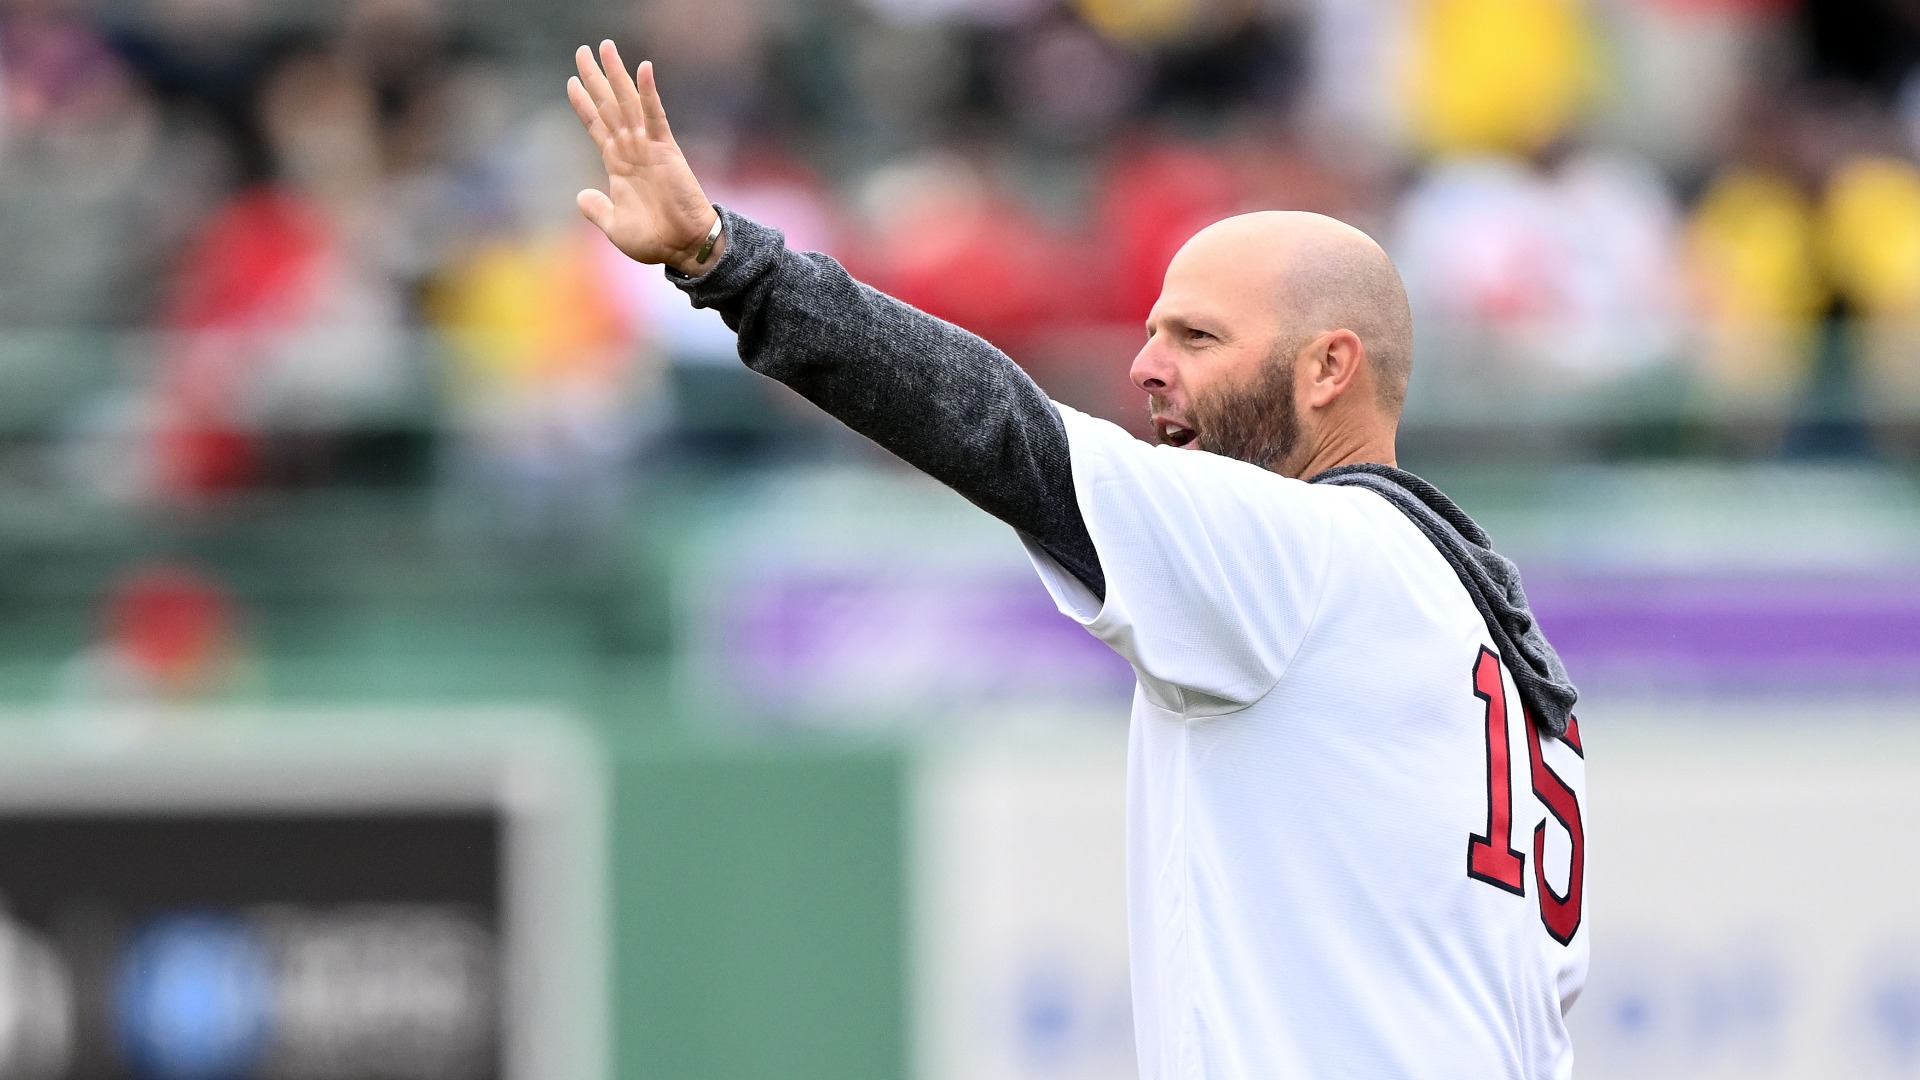 Red Sox Legend Dustin Pedroia Aids NL Squad Amid Playoff Push